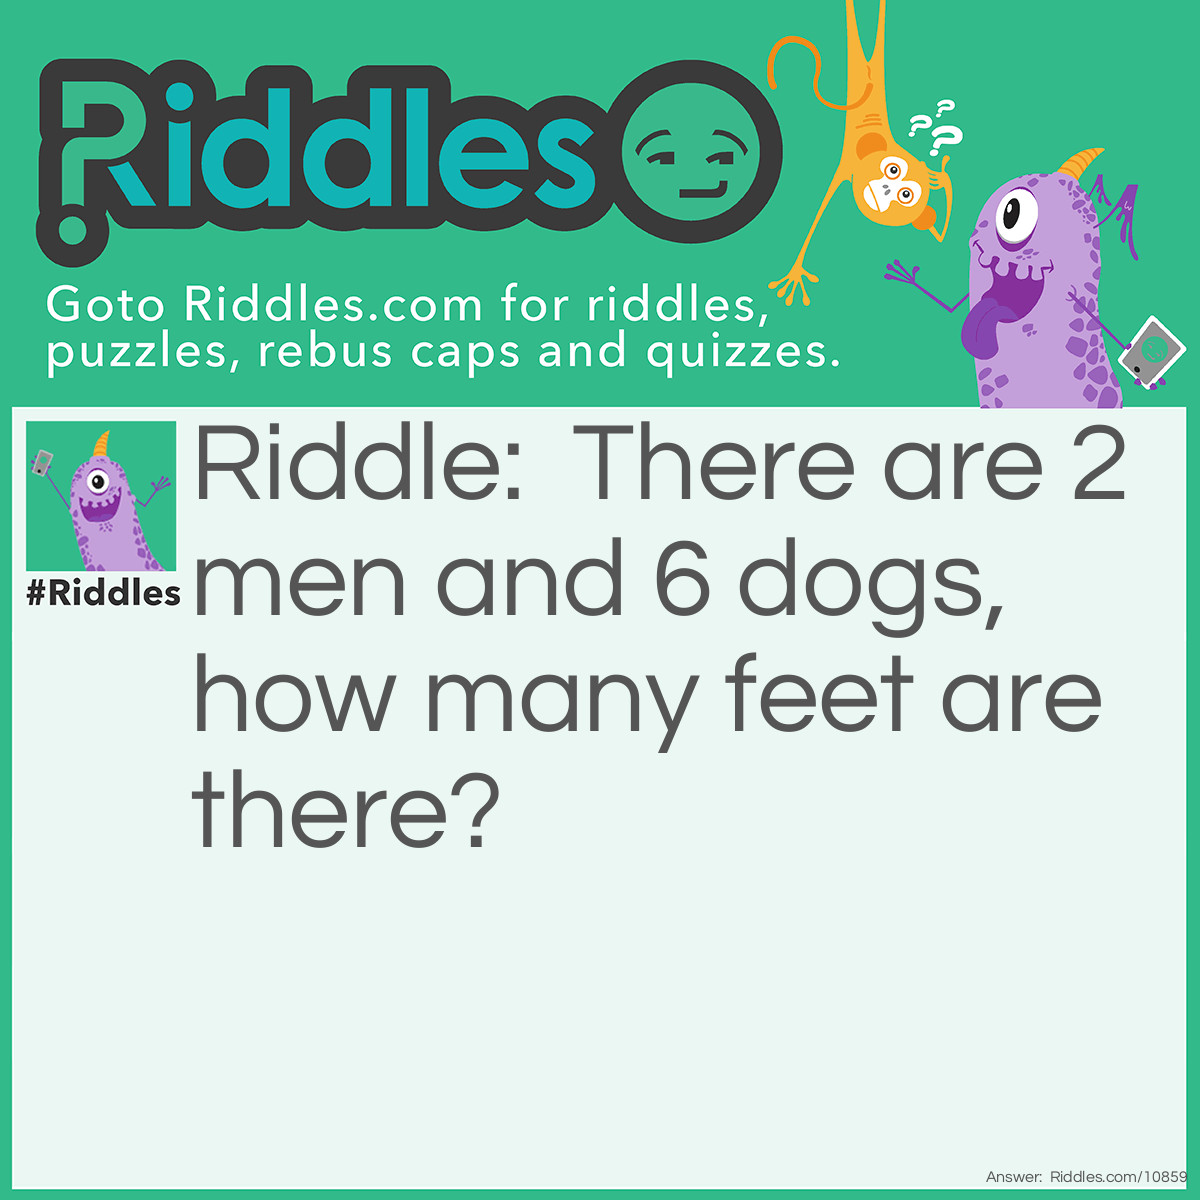 Riddle: There are 2 men and 6 dogs, how many feet are there? Answer: 4 feet, dogs have paws, not feet.